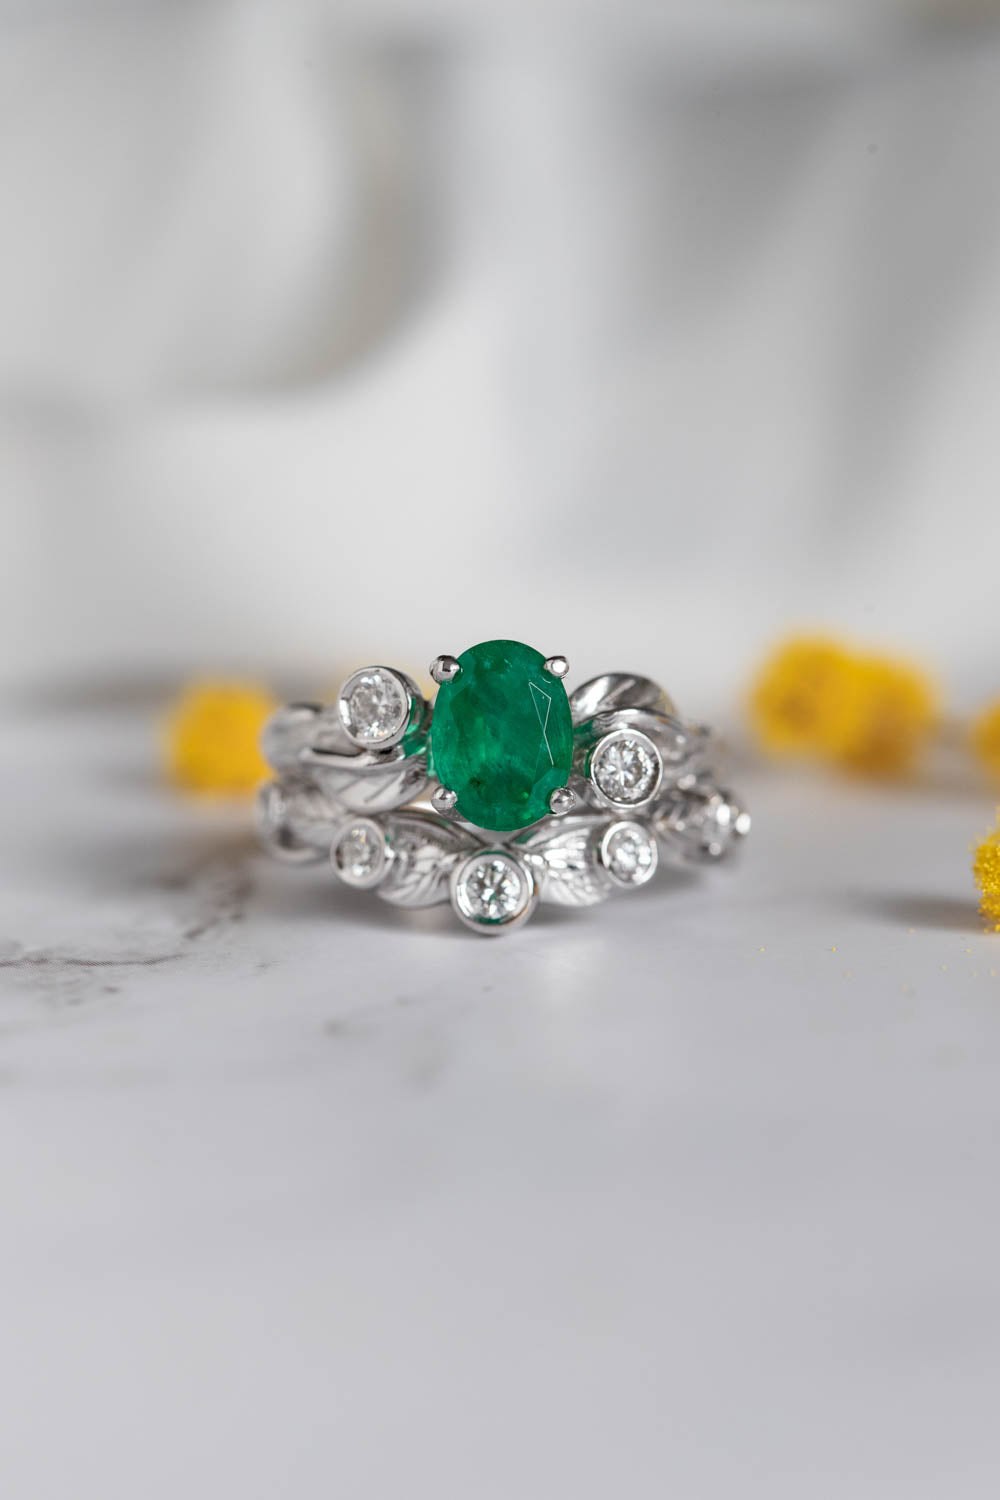 Emerald engagement ring with diamonds, white gold branch engagement ring / Arius - Eden Garden Jewelry™